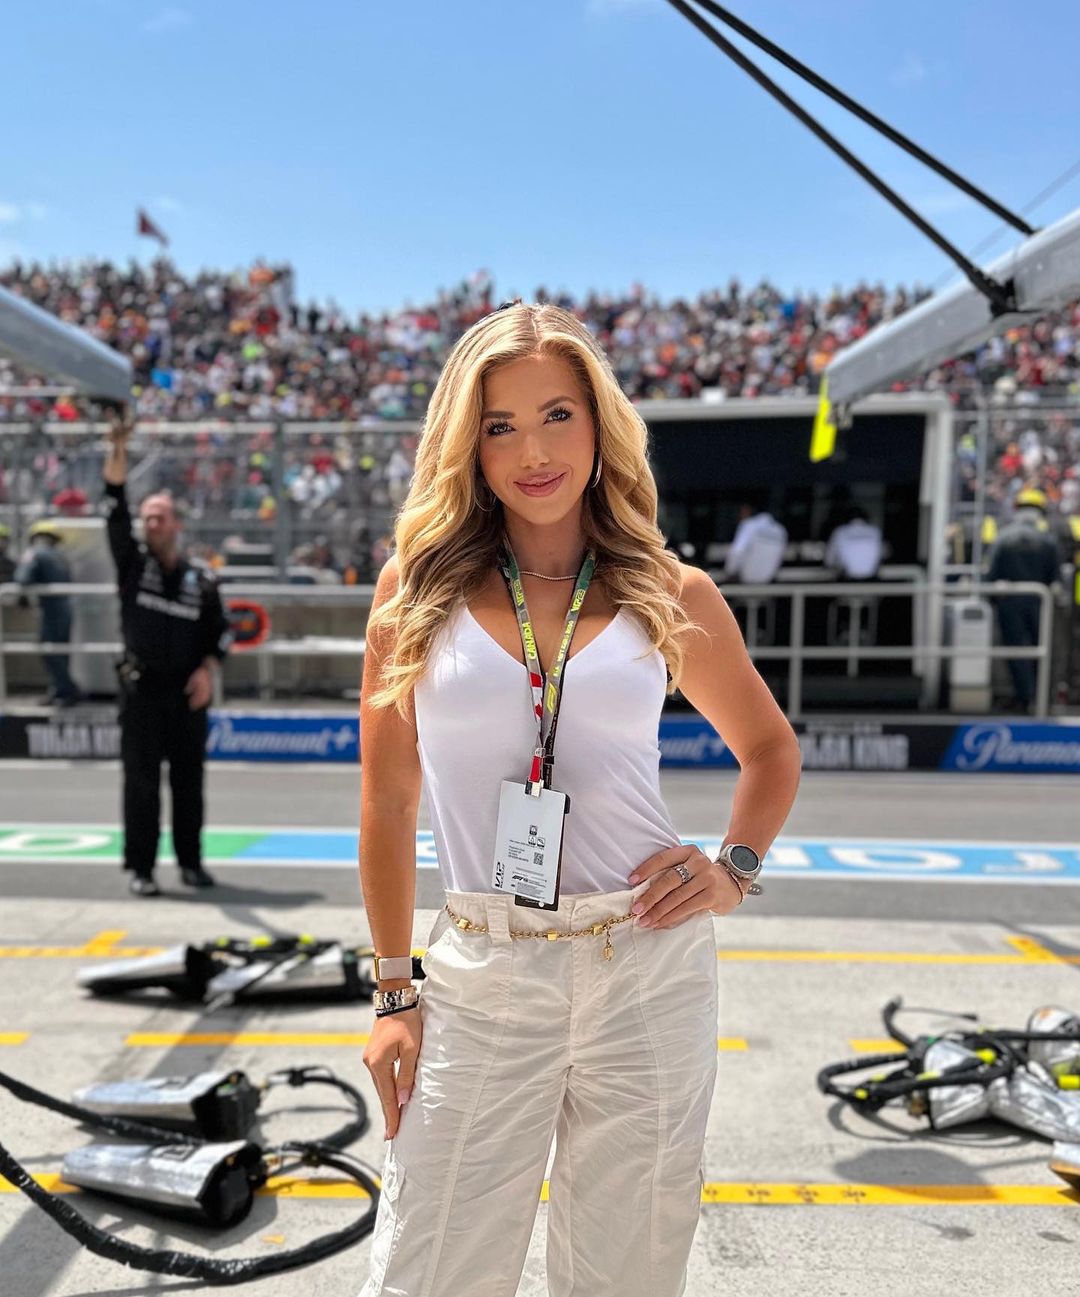 Gracie Hunt shows Kansas City Chiefs colors with outfit at Montreal Grand Prix as the NFL heiress pays tribute to Dad